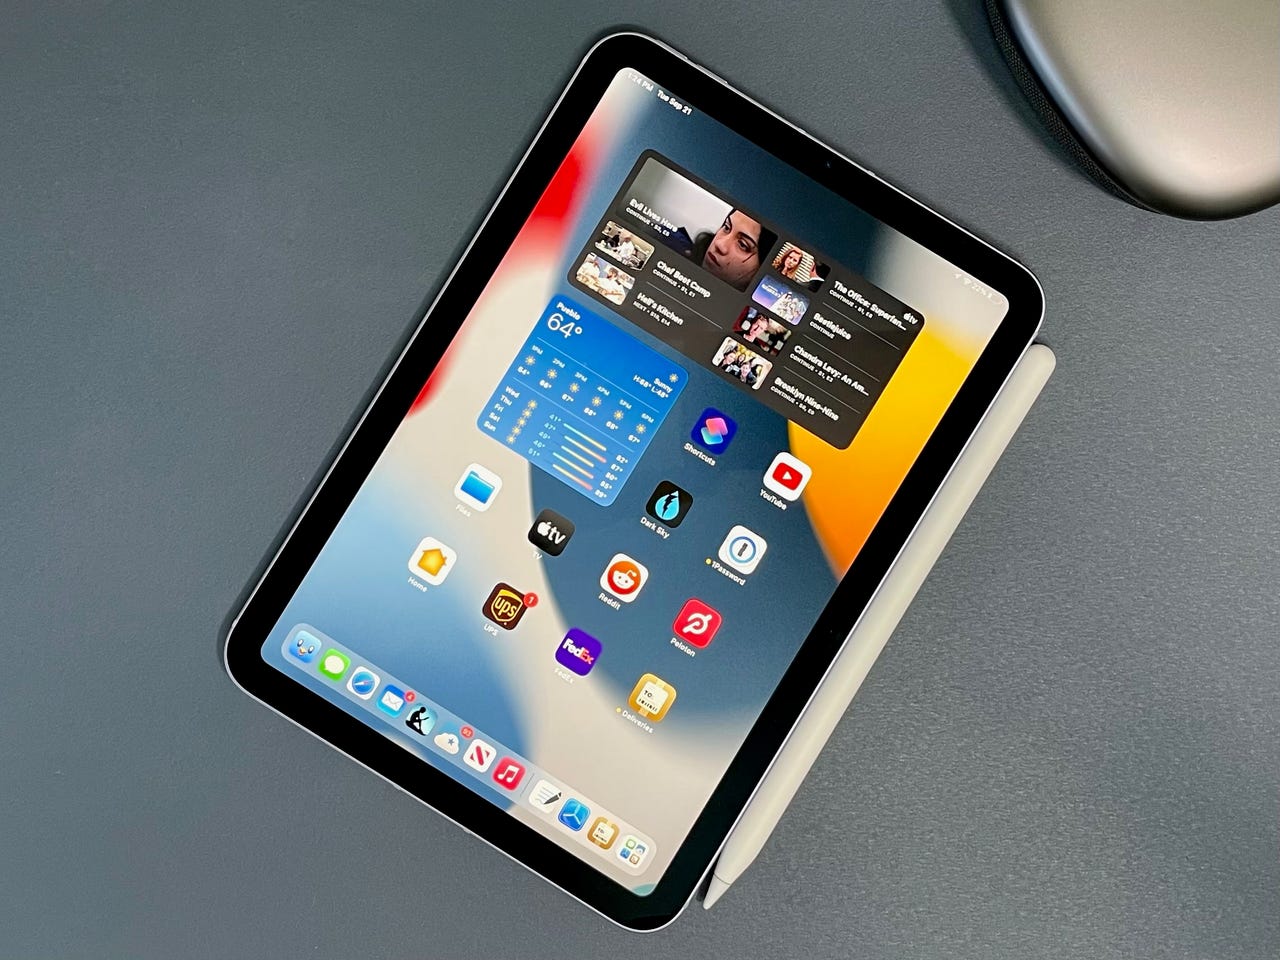 Apple iPad Mini (2021) Review: Portable but Expensive